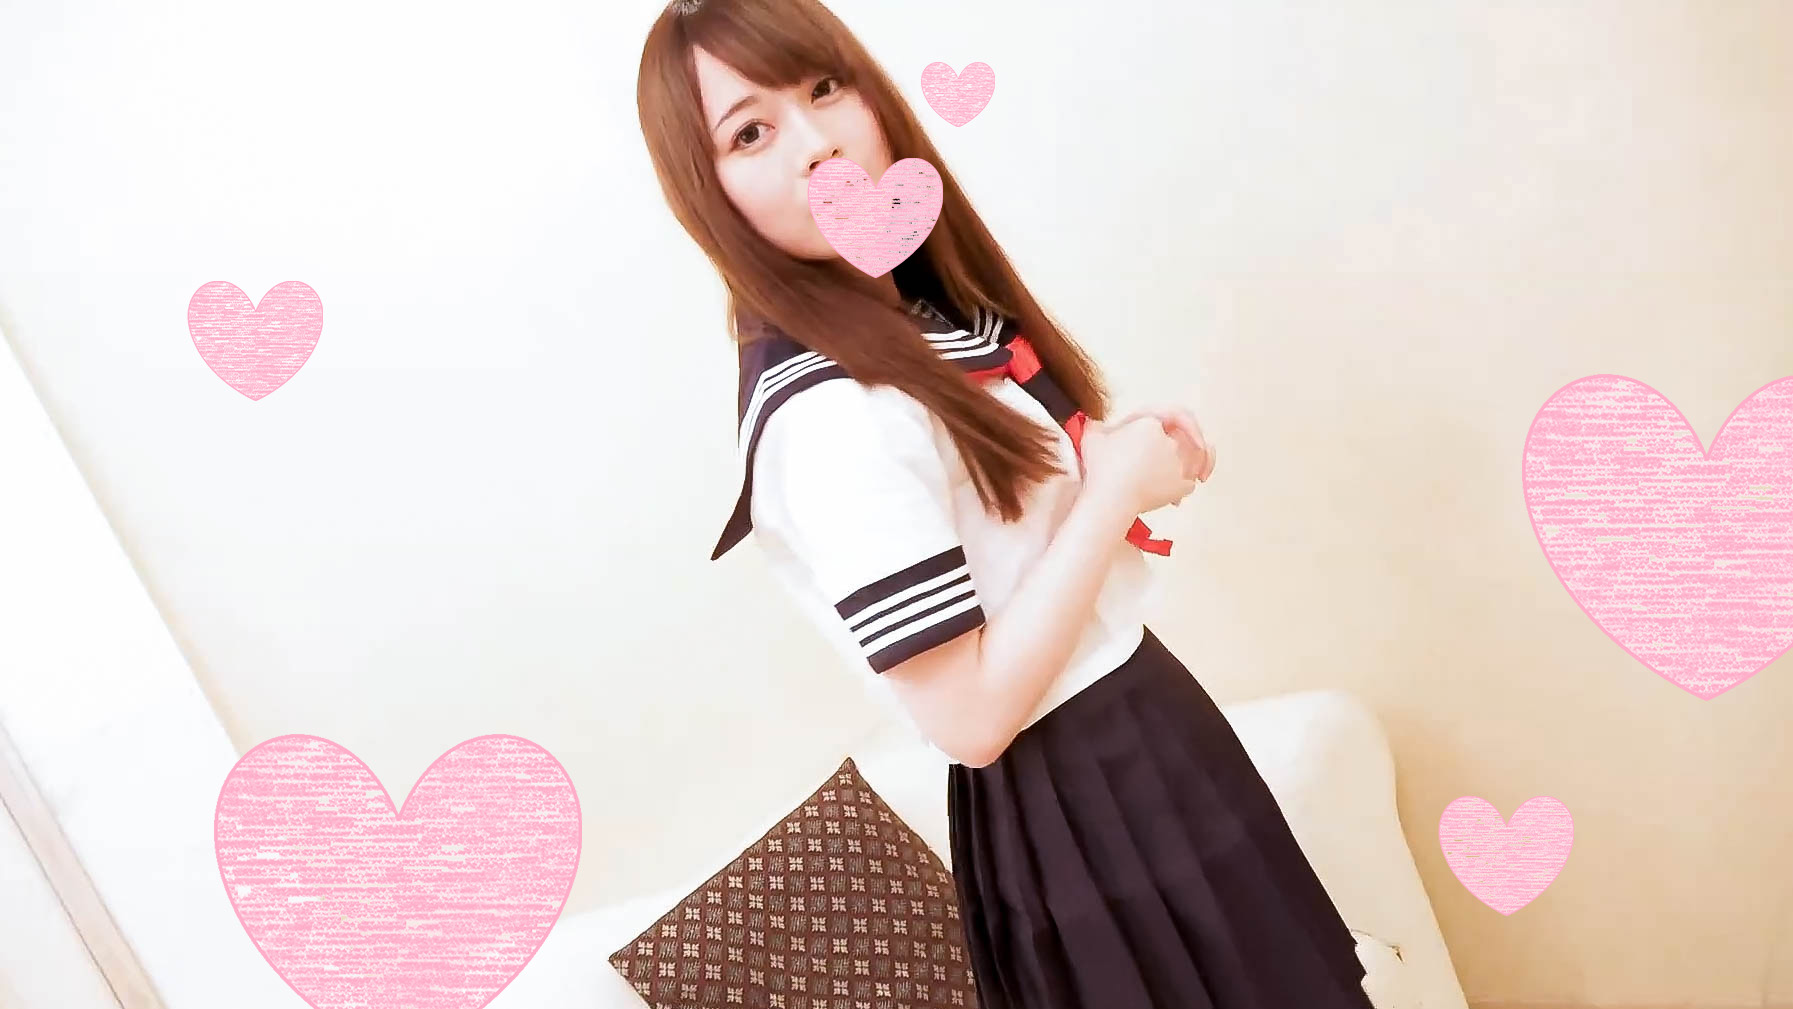 Re-appearance of Riku in a sailor uniform Pies to a pure girl with a perfect score of 100 ♥ Anal challenge